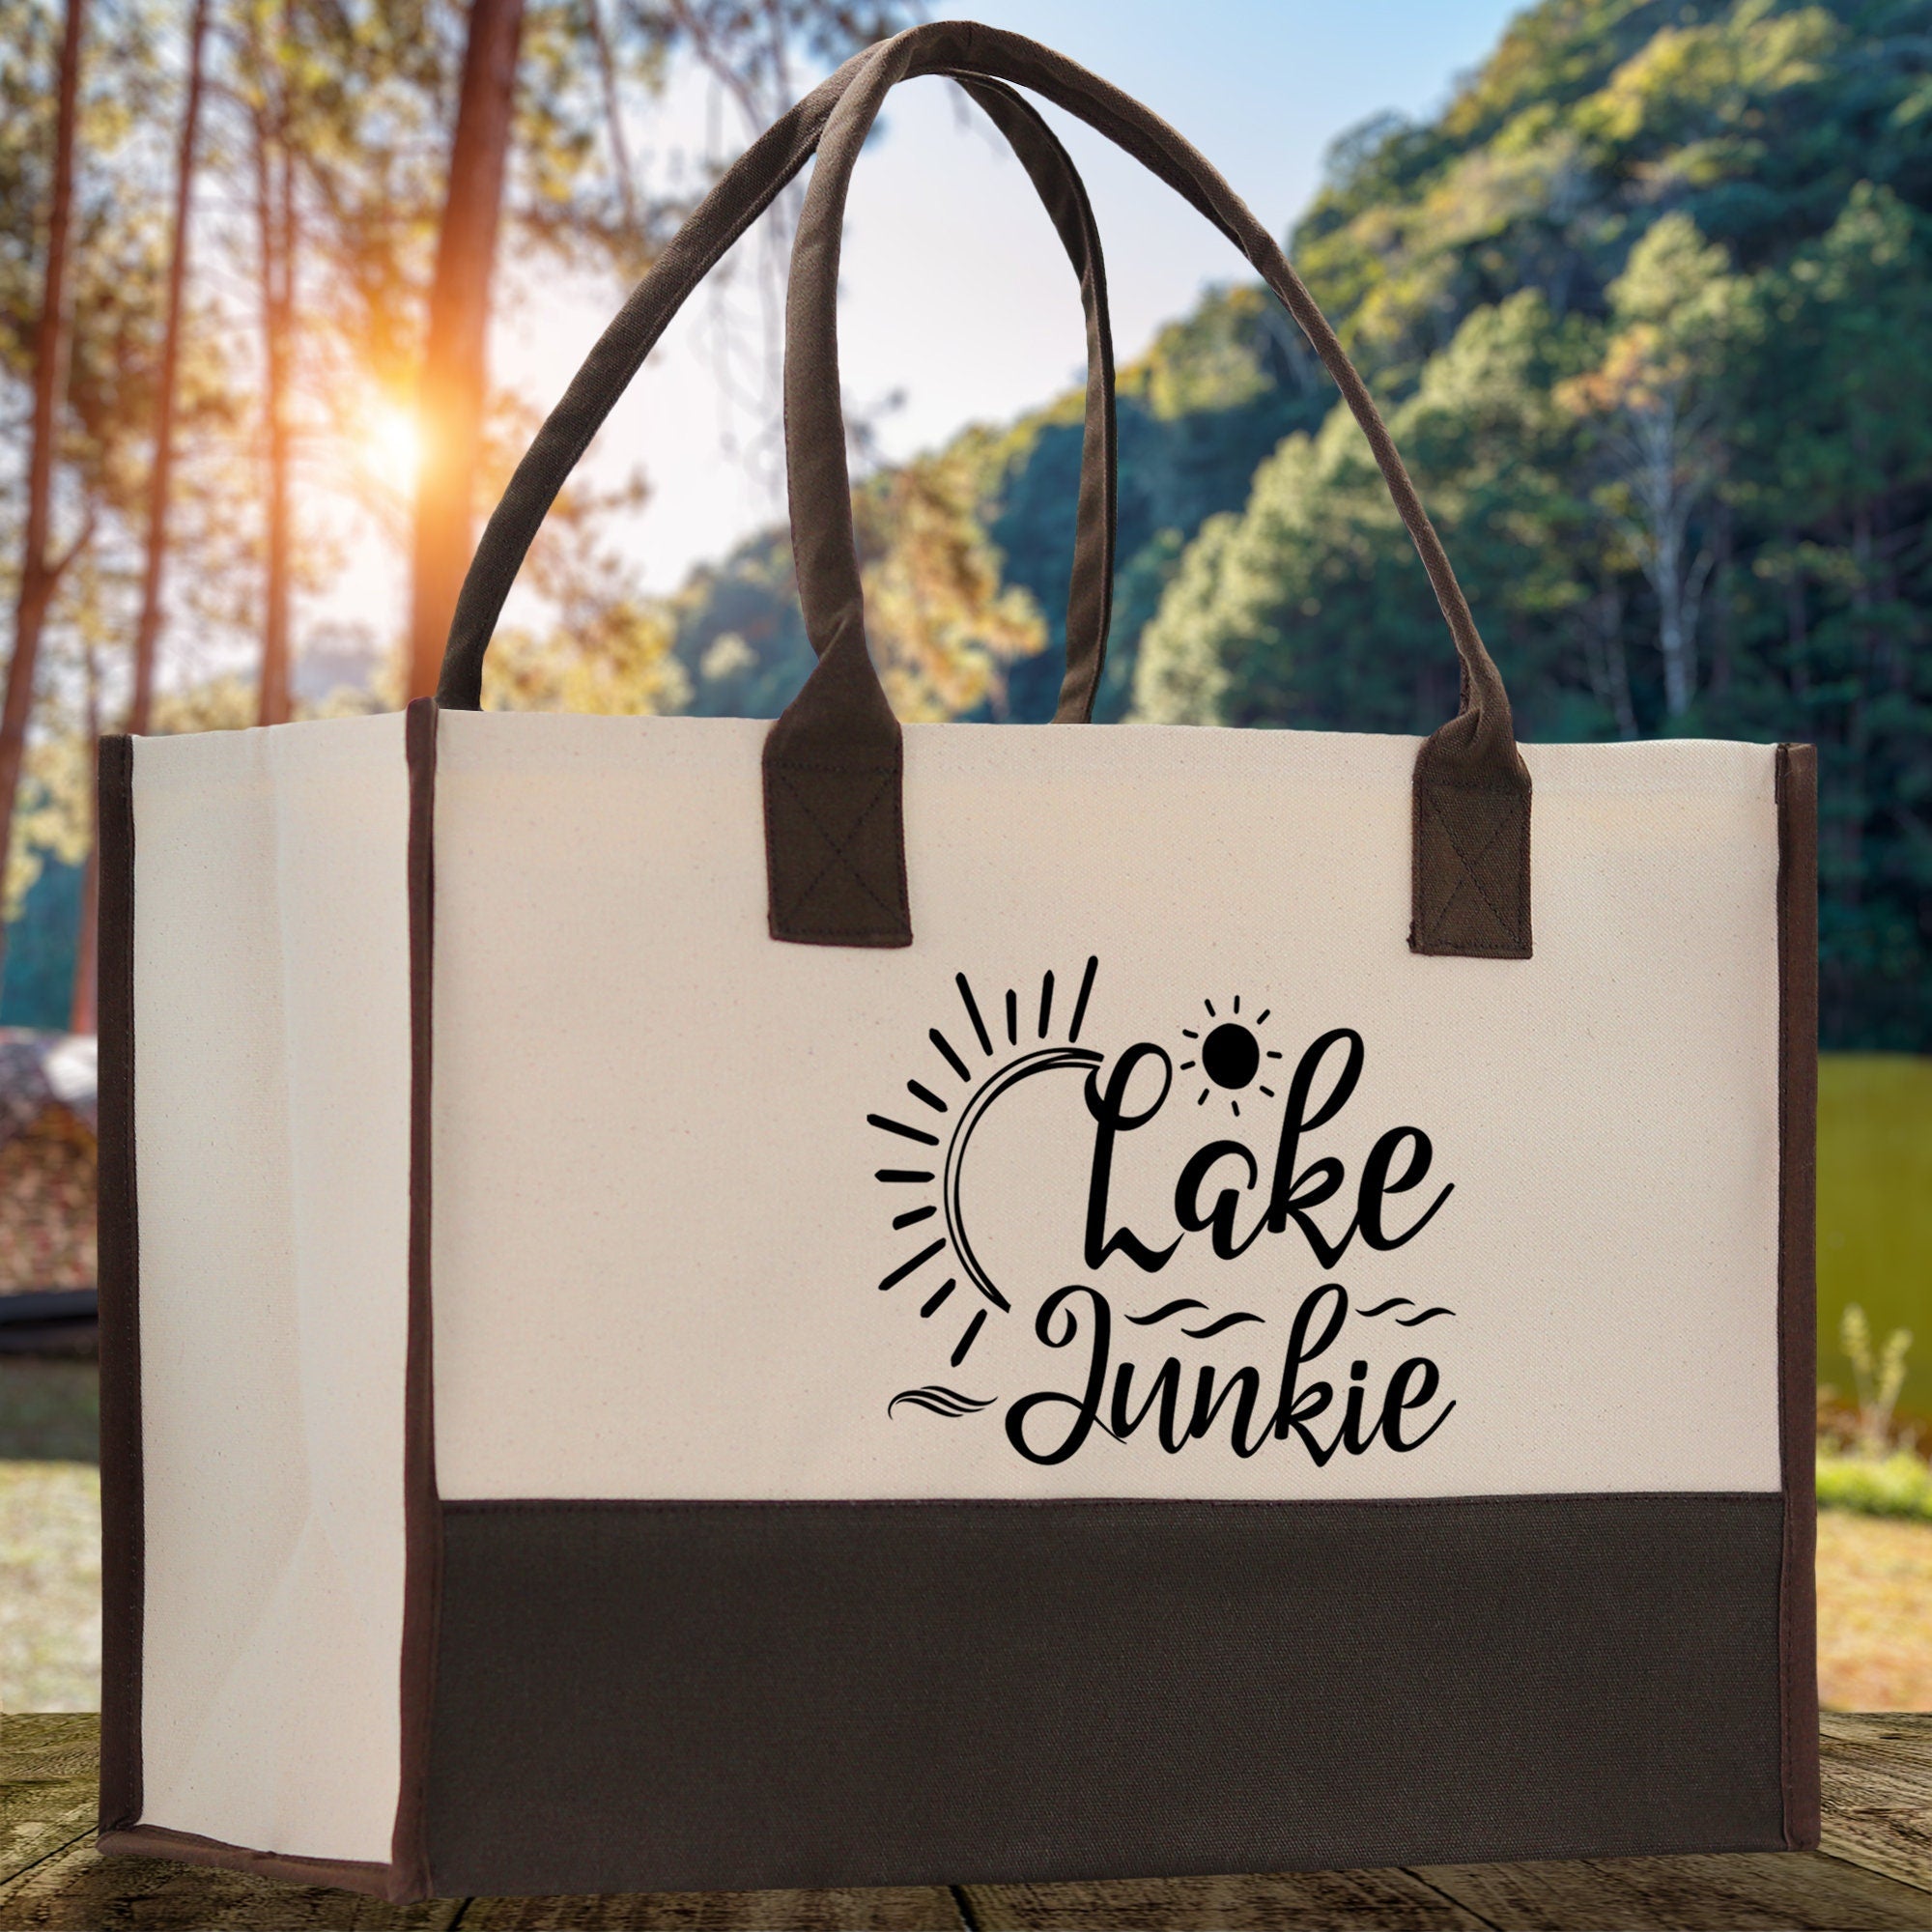 Lake Junkie Cotton Canvas Chic Tote Bag Camping Tote Lake Lover Gift Tote Bag Outdoor Tote Weekender Tote Laker Tote Multipurpose Tote